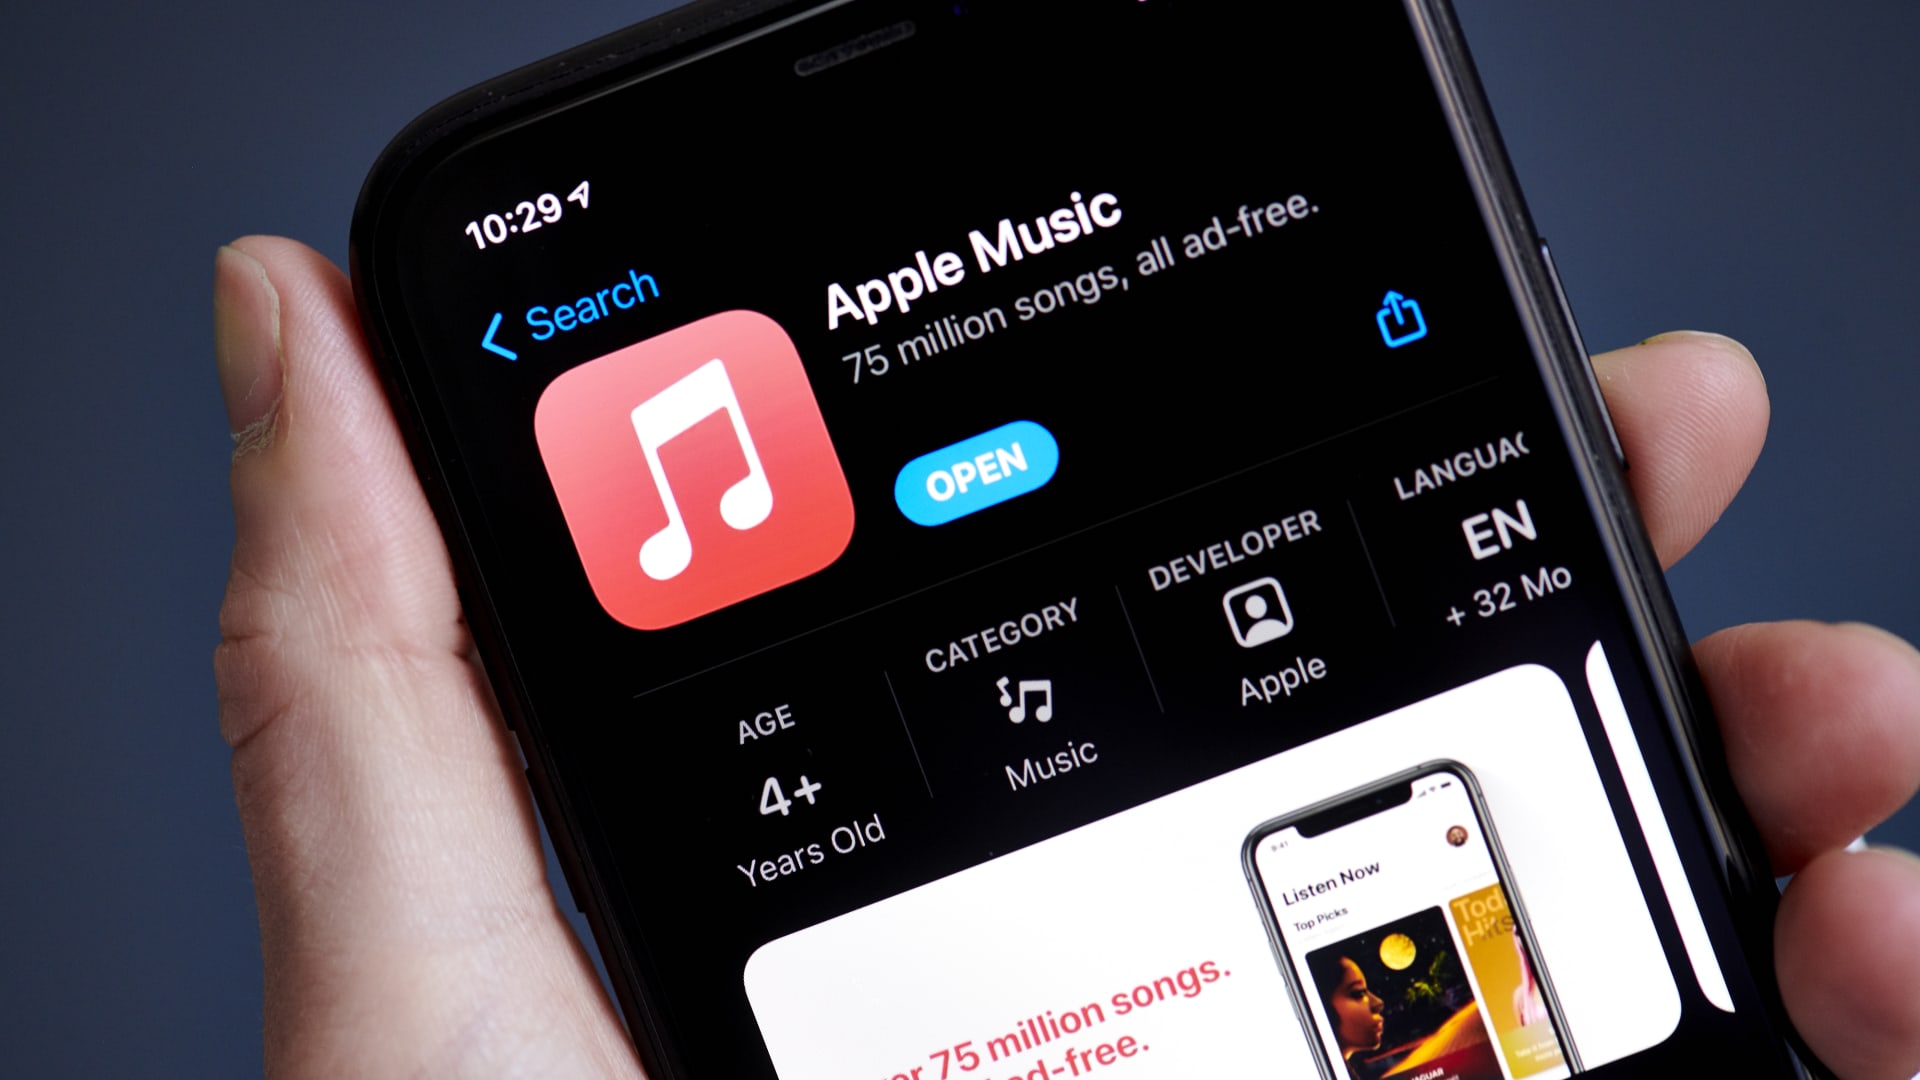 Apple says App Store is down along with music, podcasts and other services